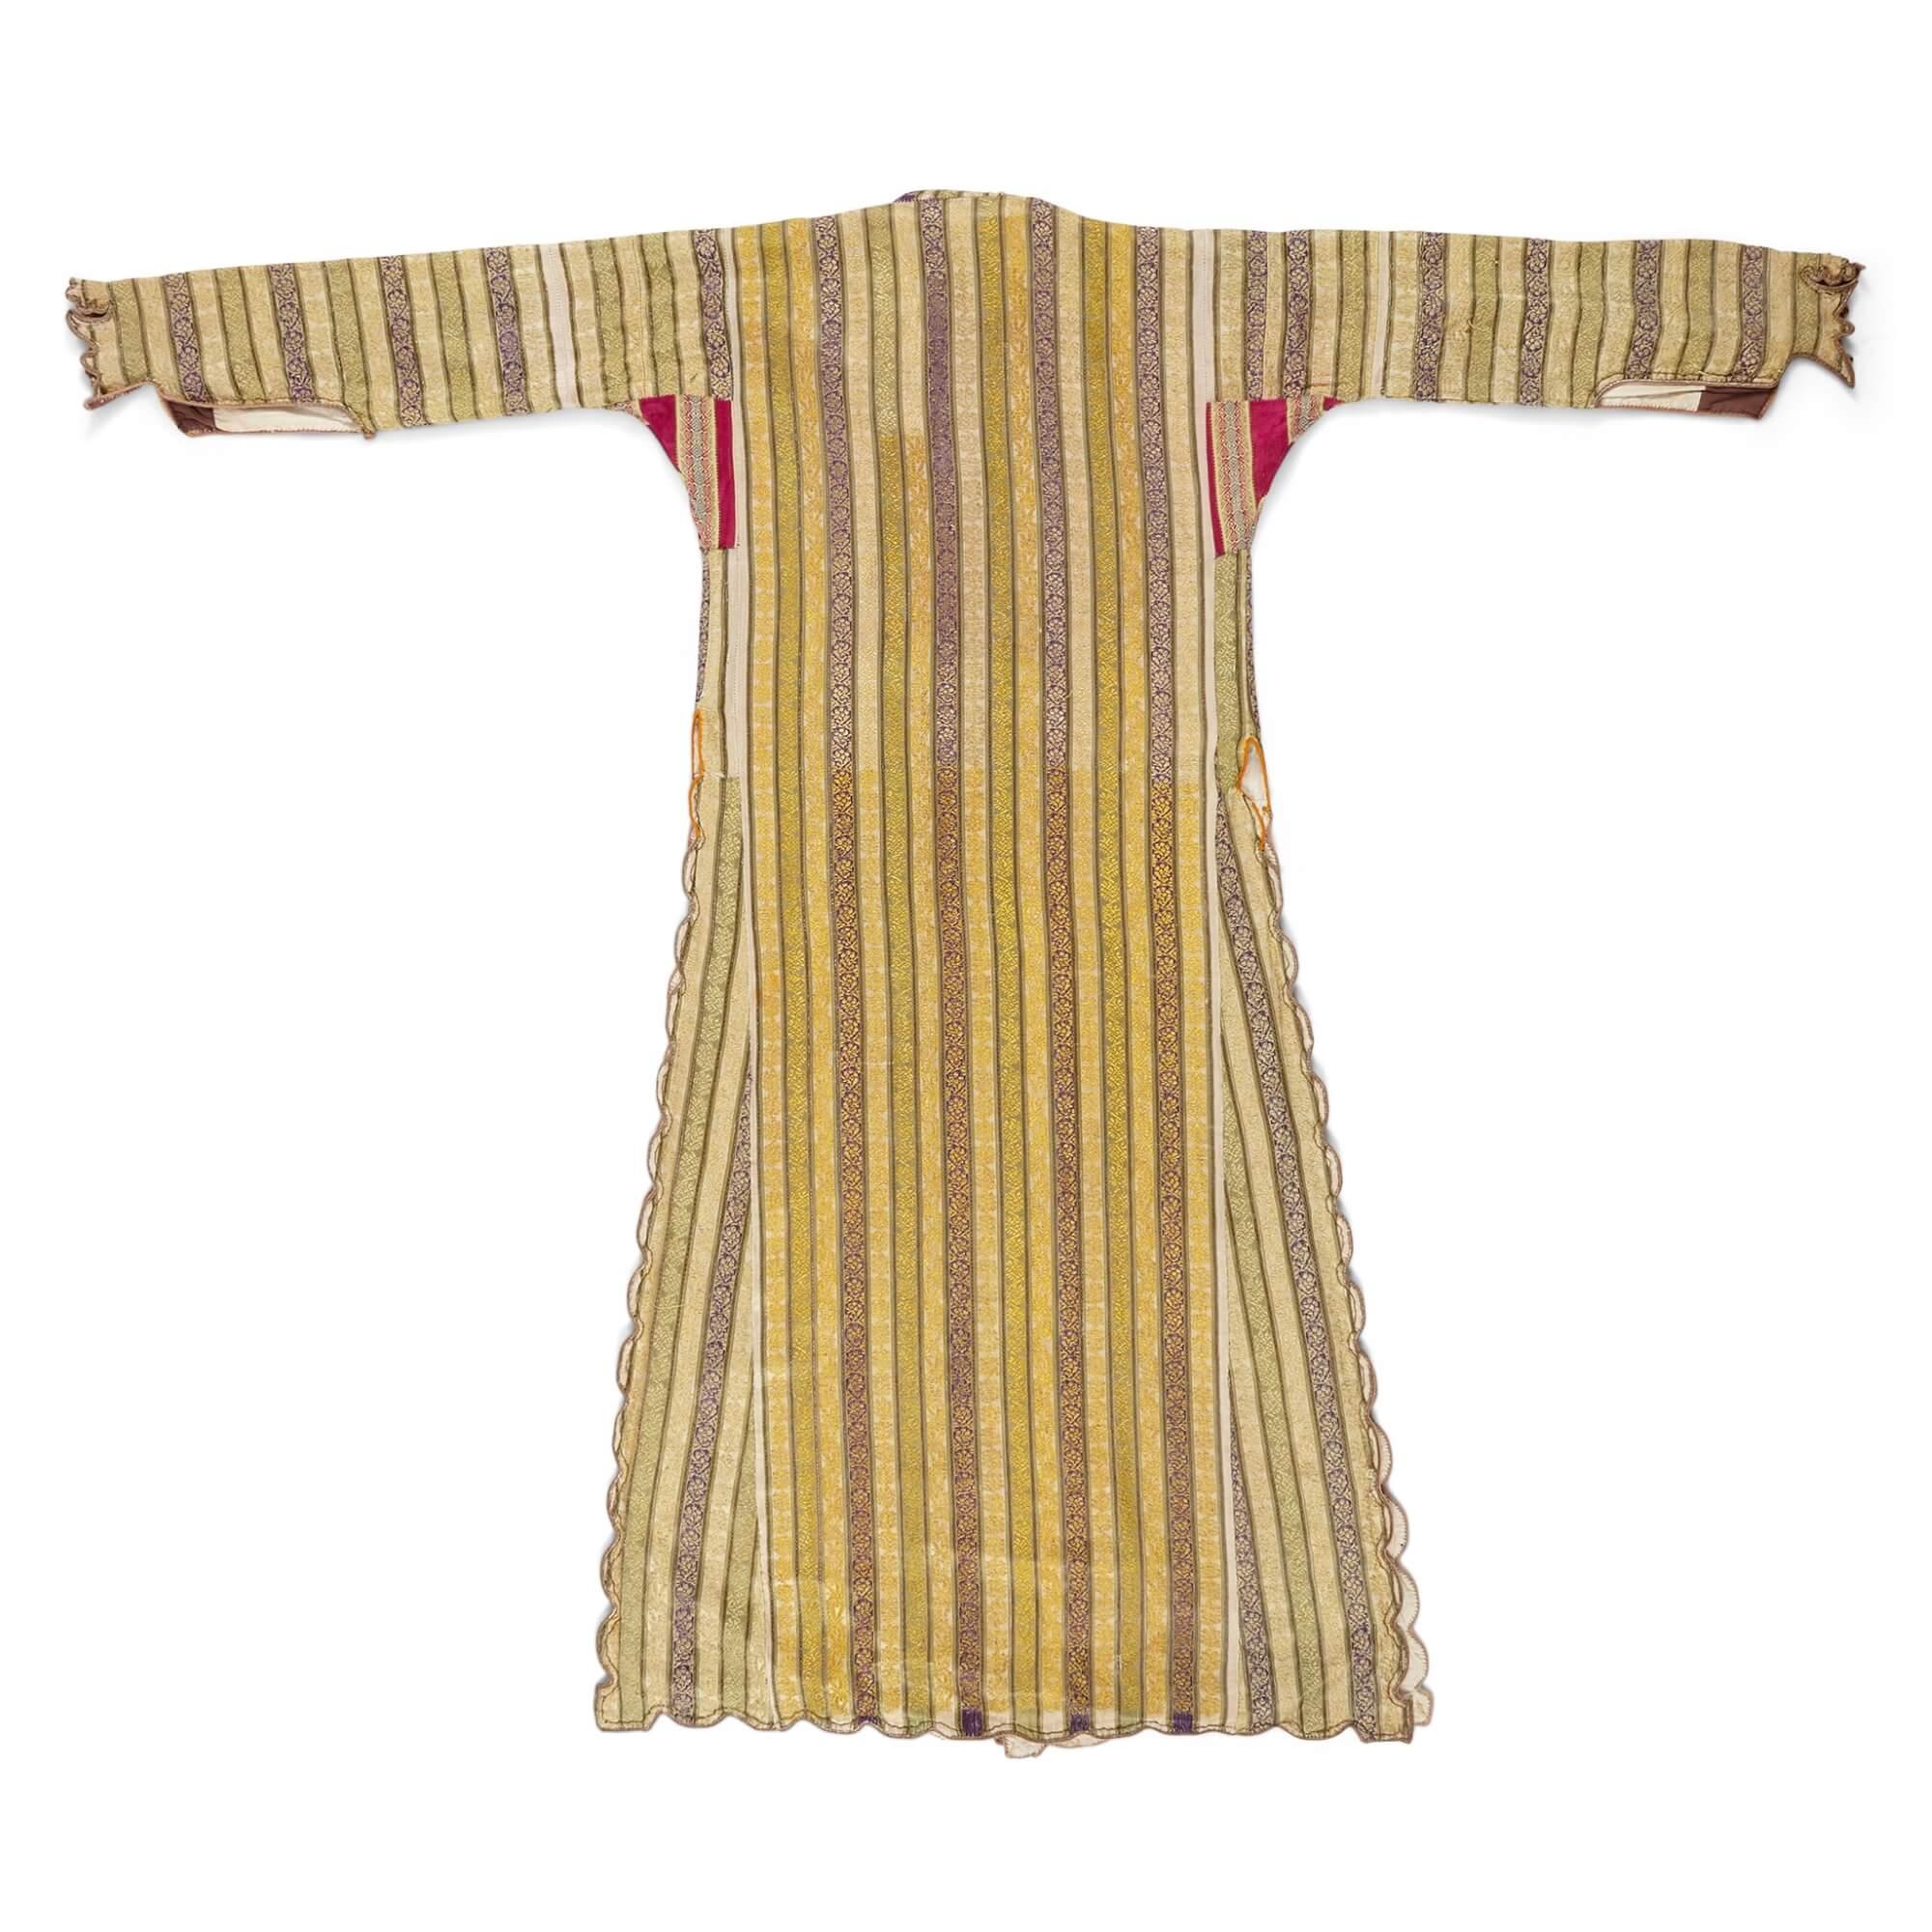 A 19th Century Turkish ottoman period kaftan
Height 136cm, width 159cm

This antique kaftan dates from the Ottoman period in Turkey during the 19th Century, and will make an excellent addition to an antique clothing collection as well as a fine